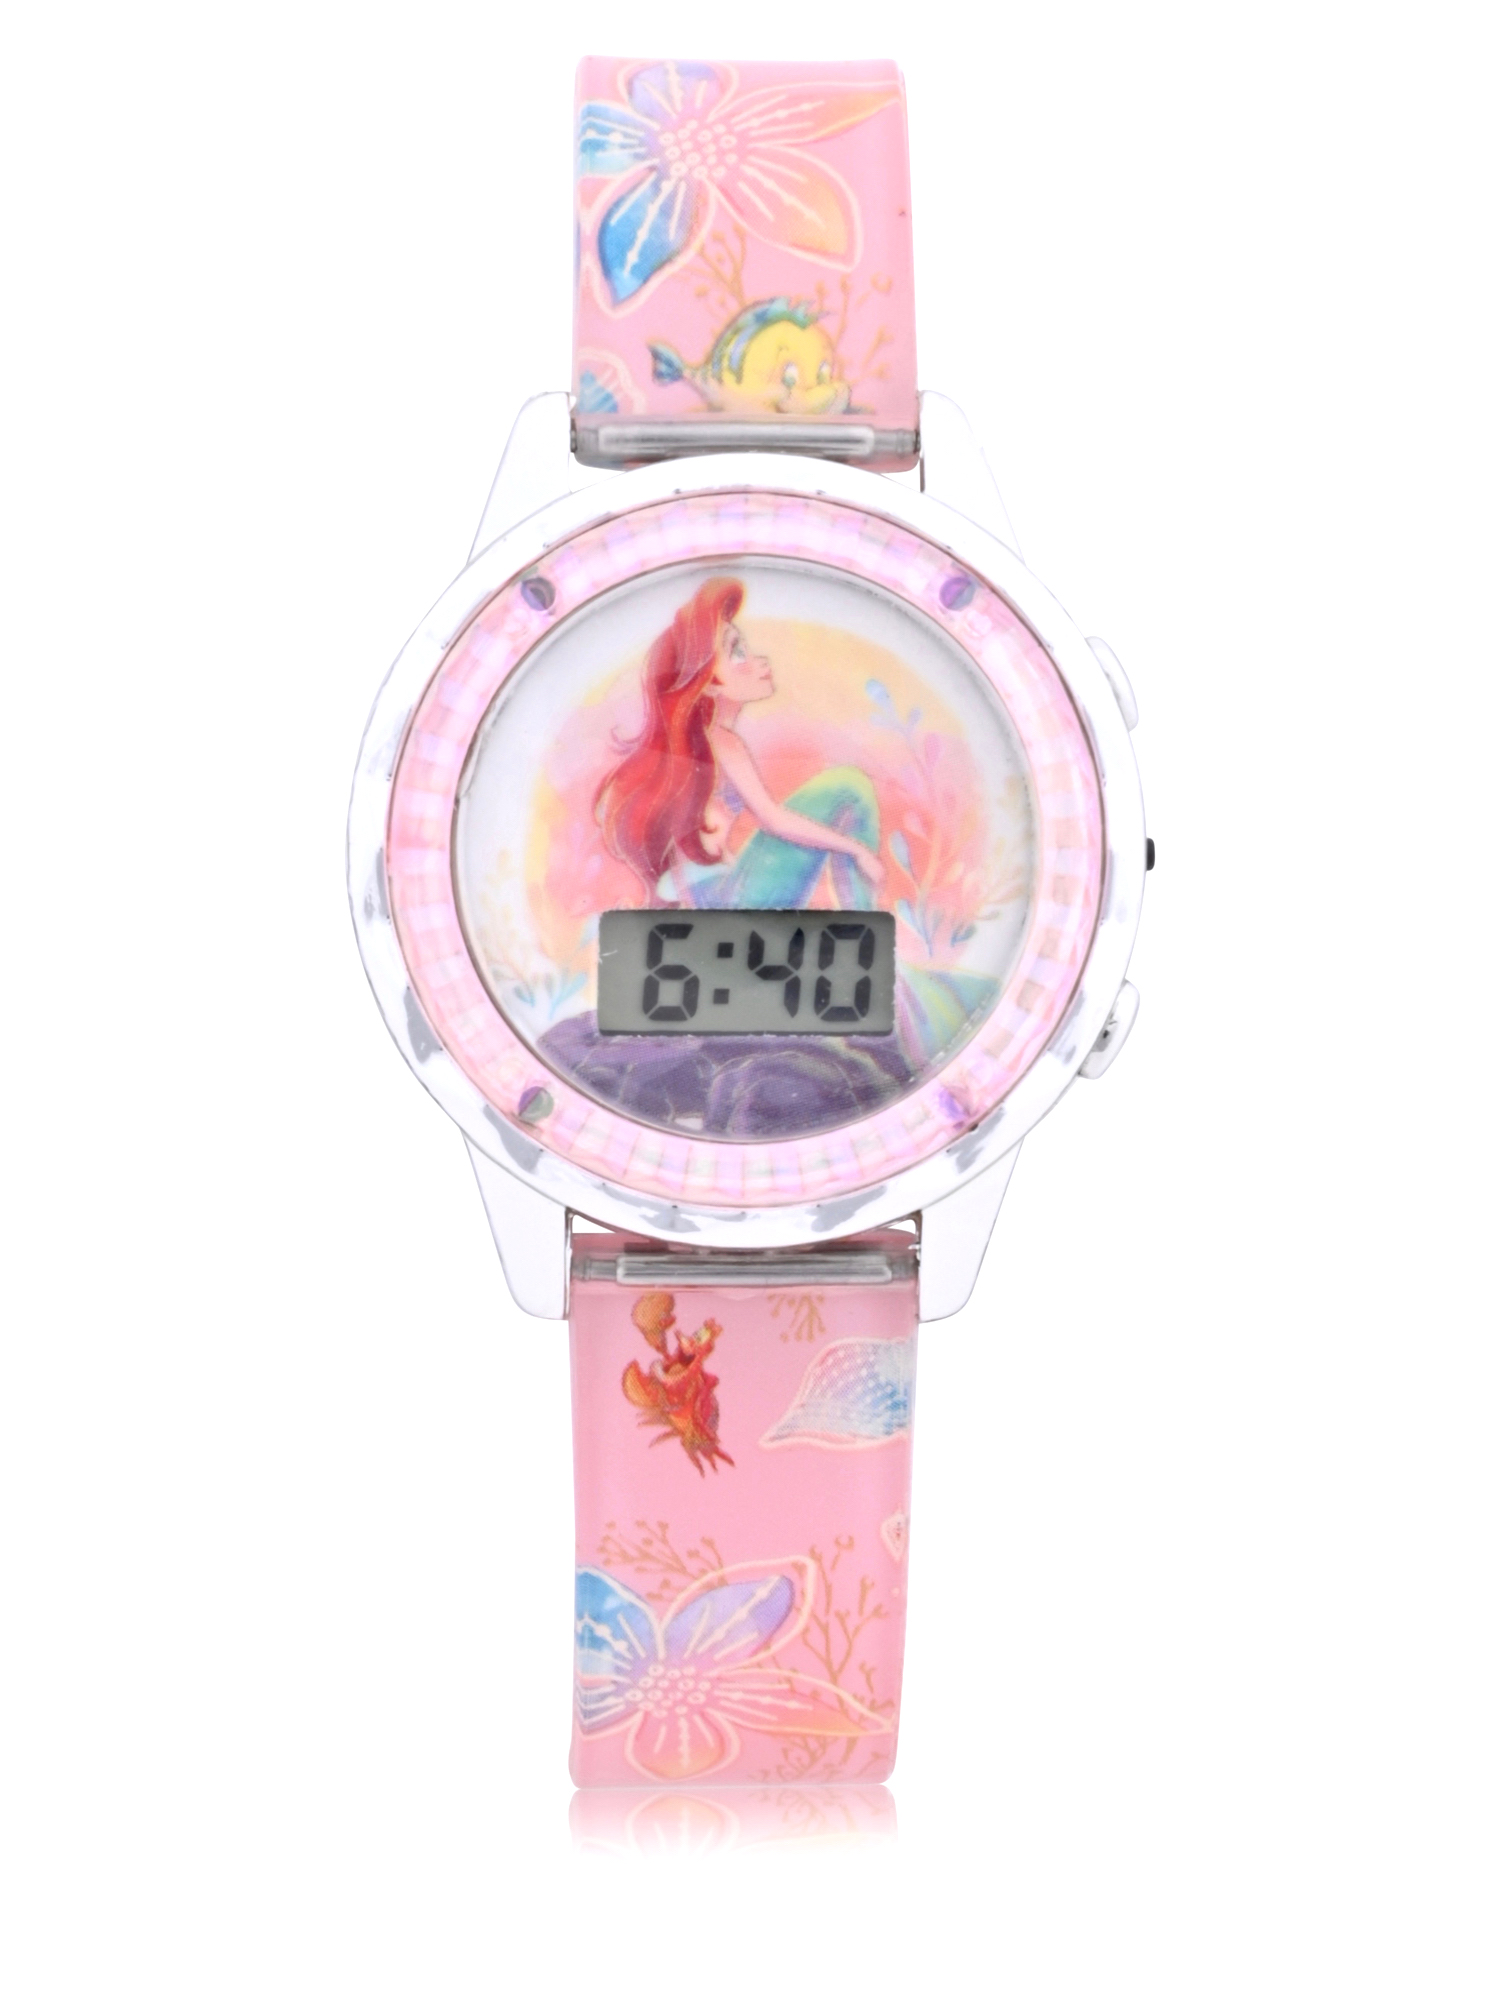 Disney Princess Ariel Girls Flashing LCD Pink Ombre Silicone Watch, Bracelet and Hair Accessory 3 Piece Set - image 2 of 6